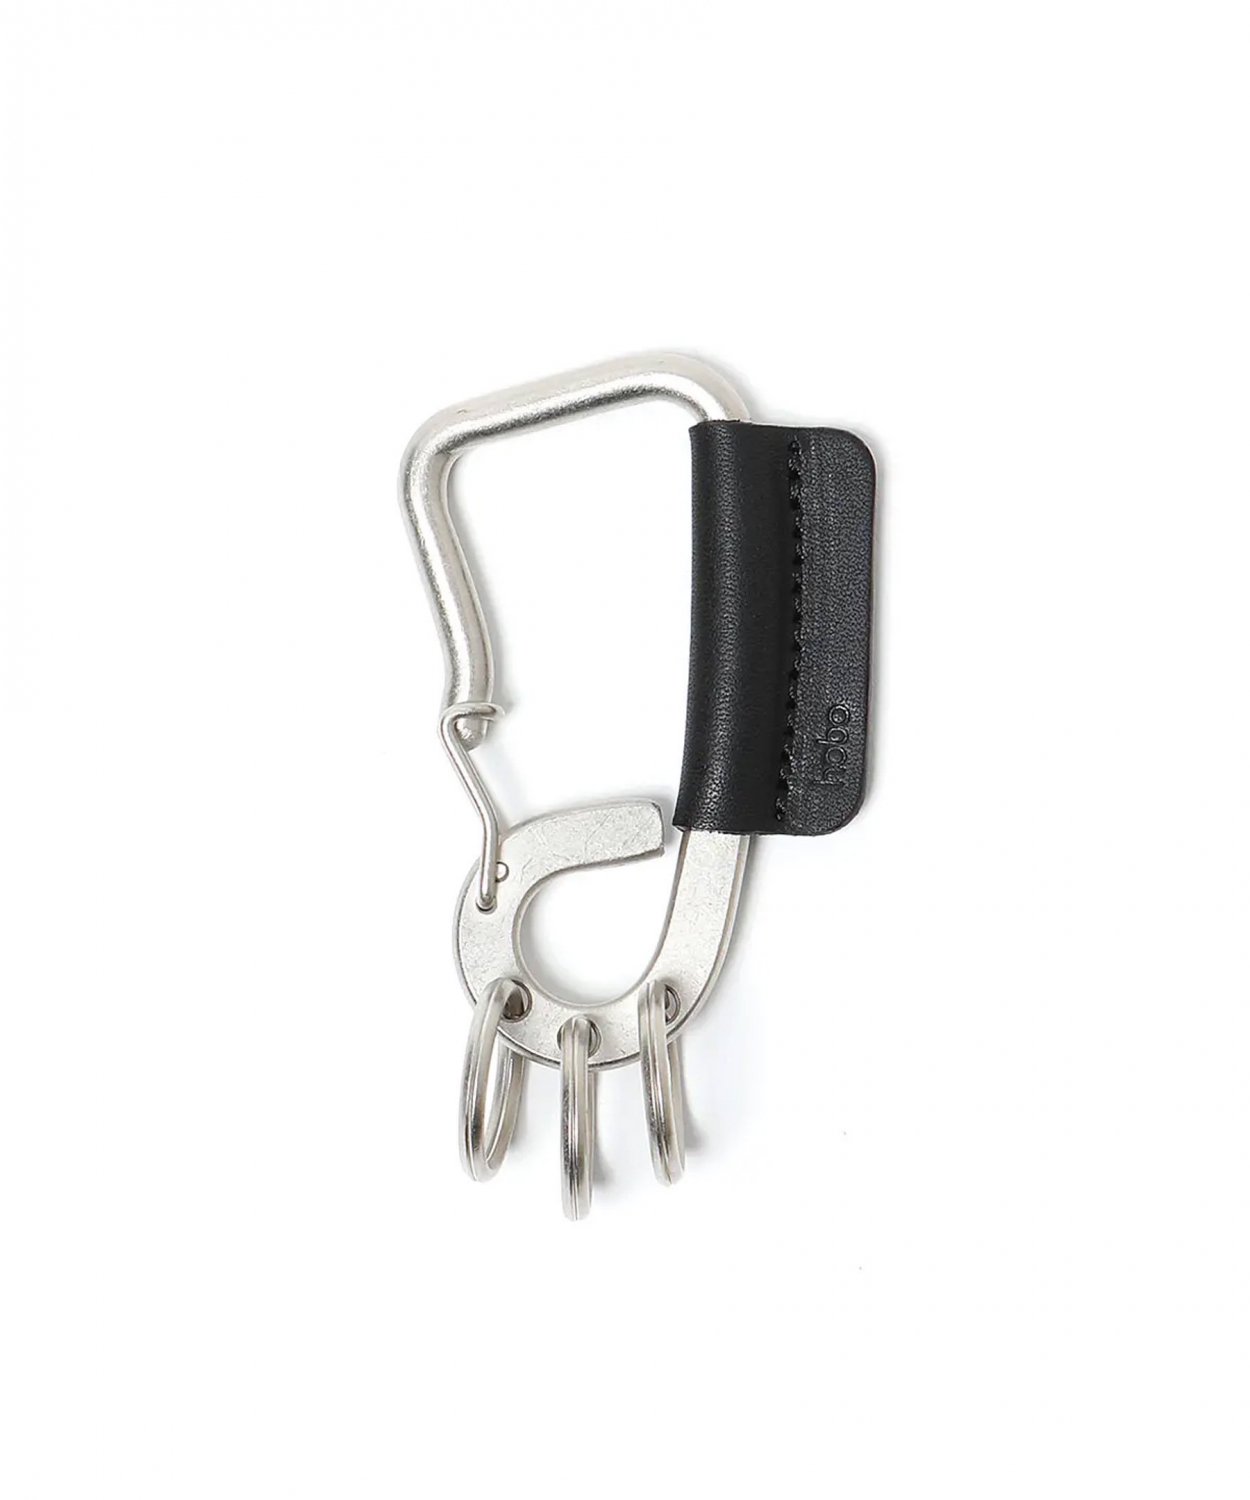 HOBO / CARABINER KEY RING L with COW LEATHER
